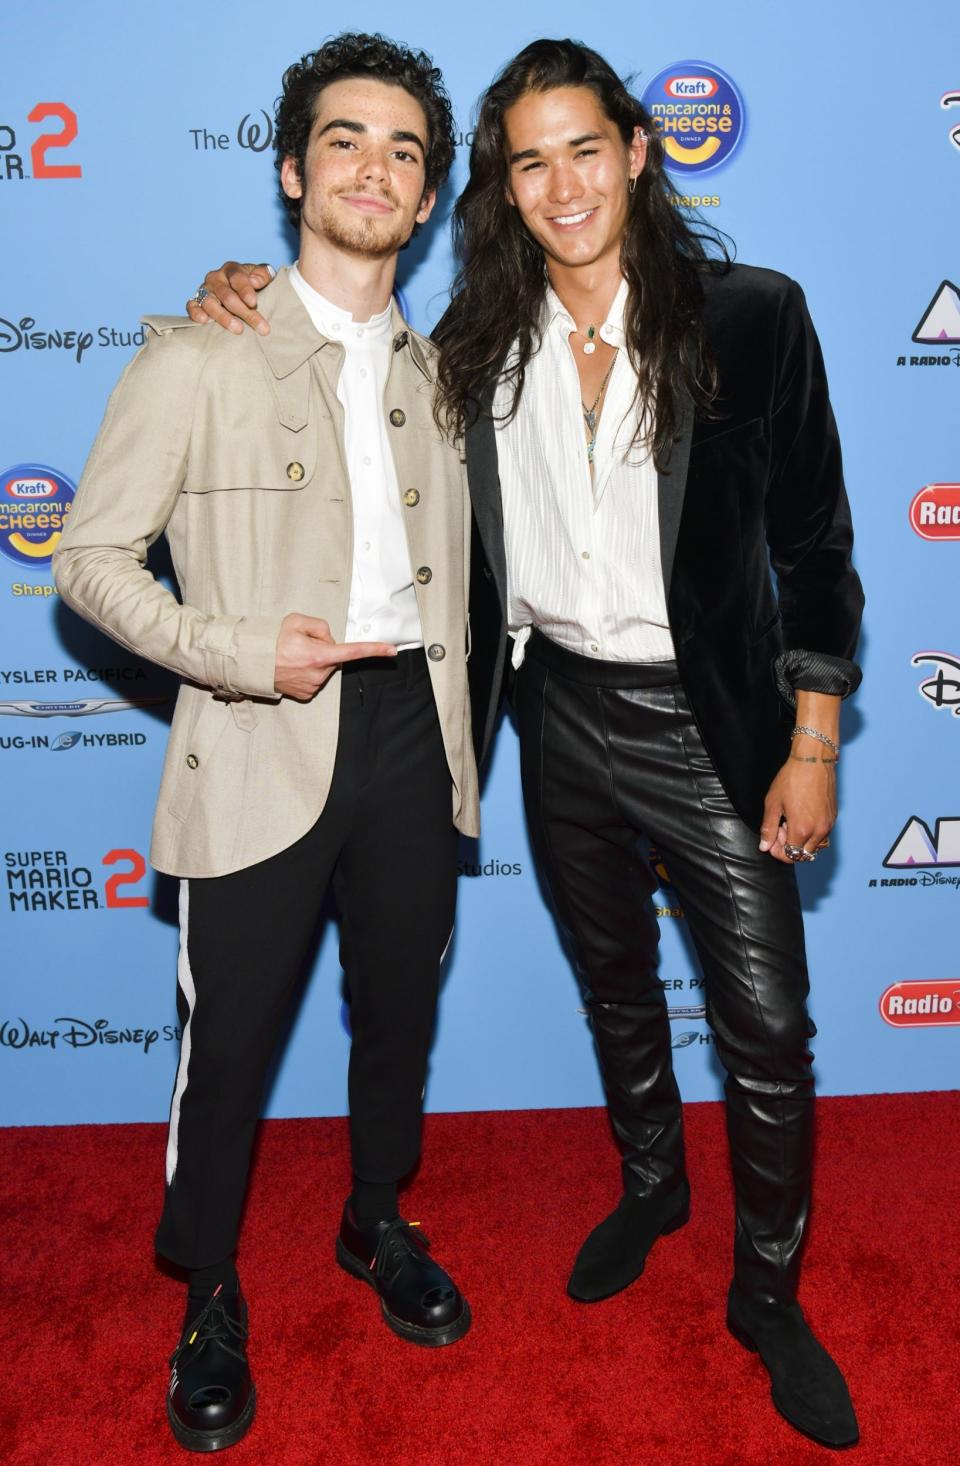 Cameron Boyce (left) and fellow actor Booboo Stewart attend the 2019 Radio Disney Music Awards in June 2019. (Getty Images)